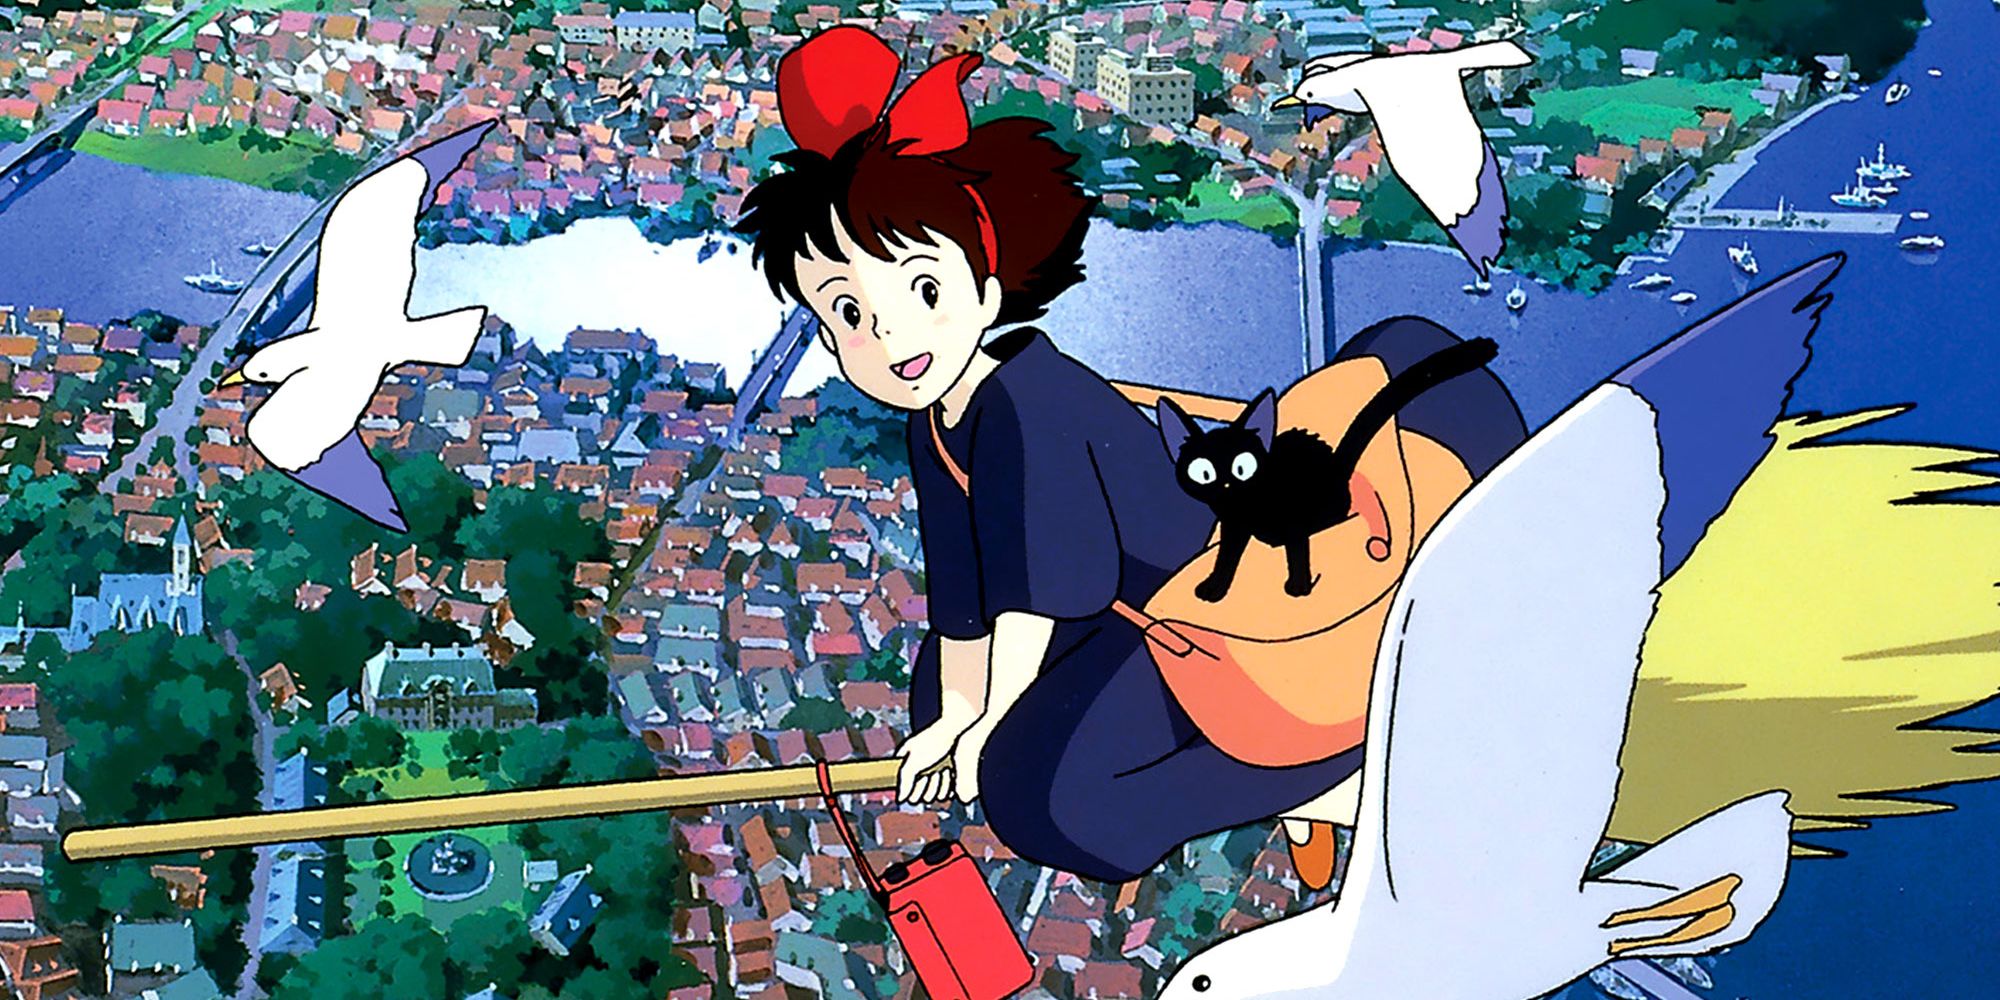 Kiki and Jiji flying high above the city in Kiki’s Delivery Service